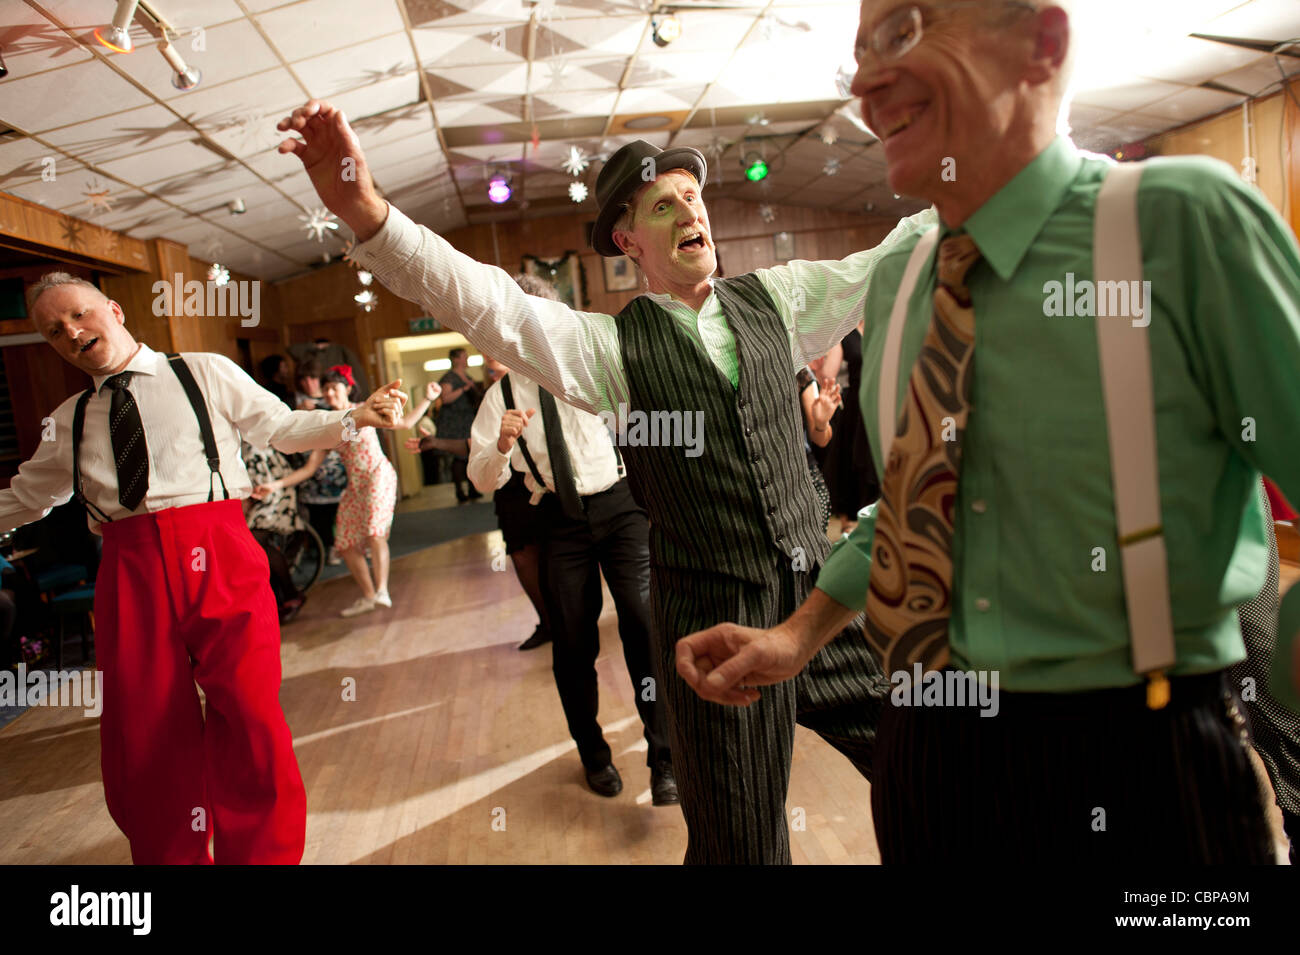 men swing dancing Lindy hopping and jiving to retro 40s 50s music at a club, UK Stock Photo